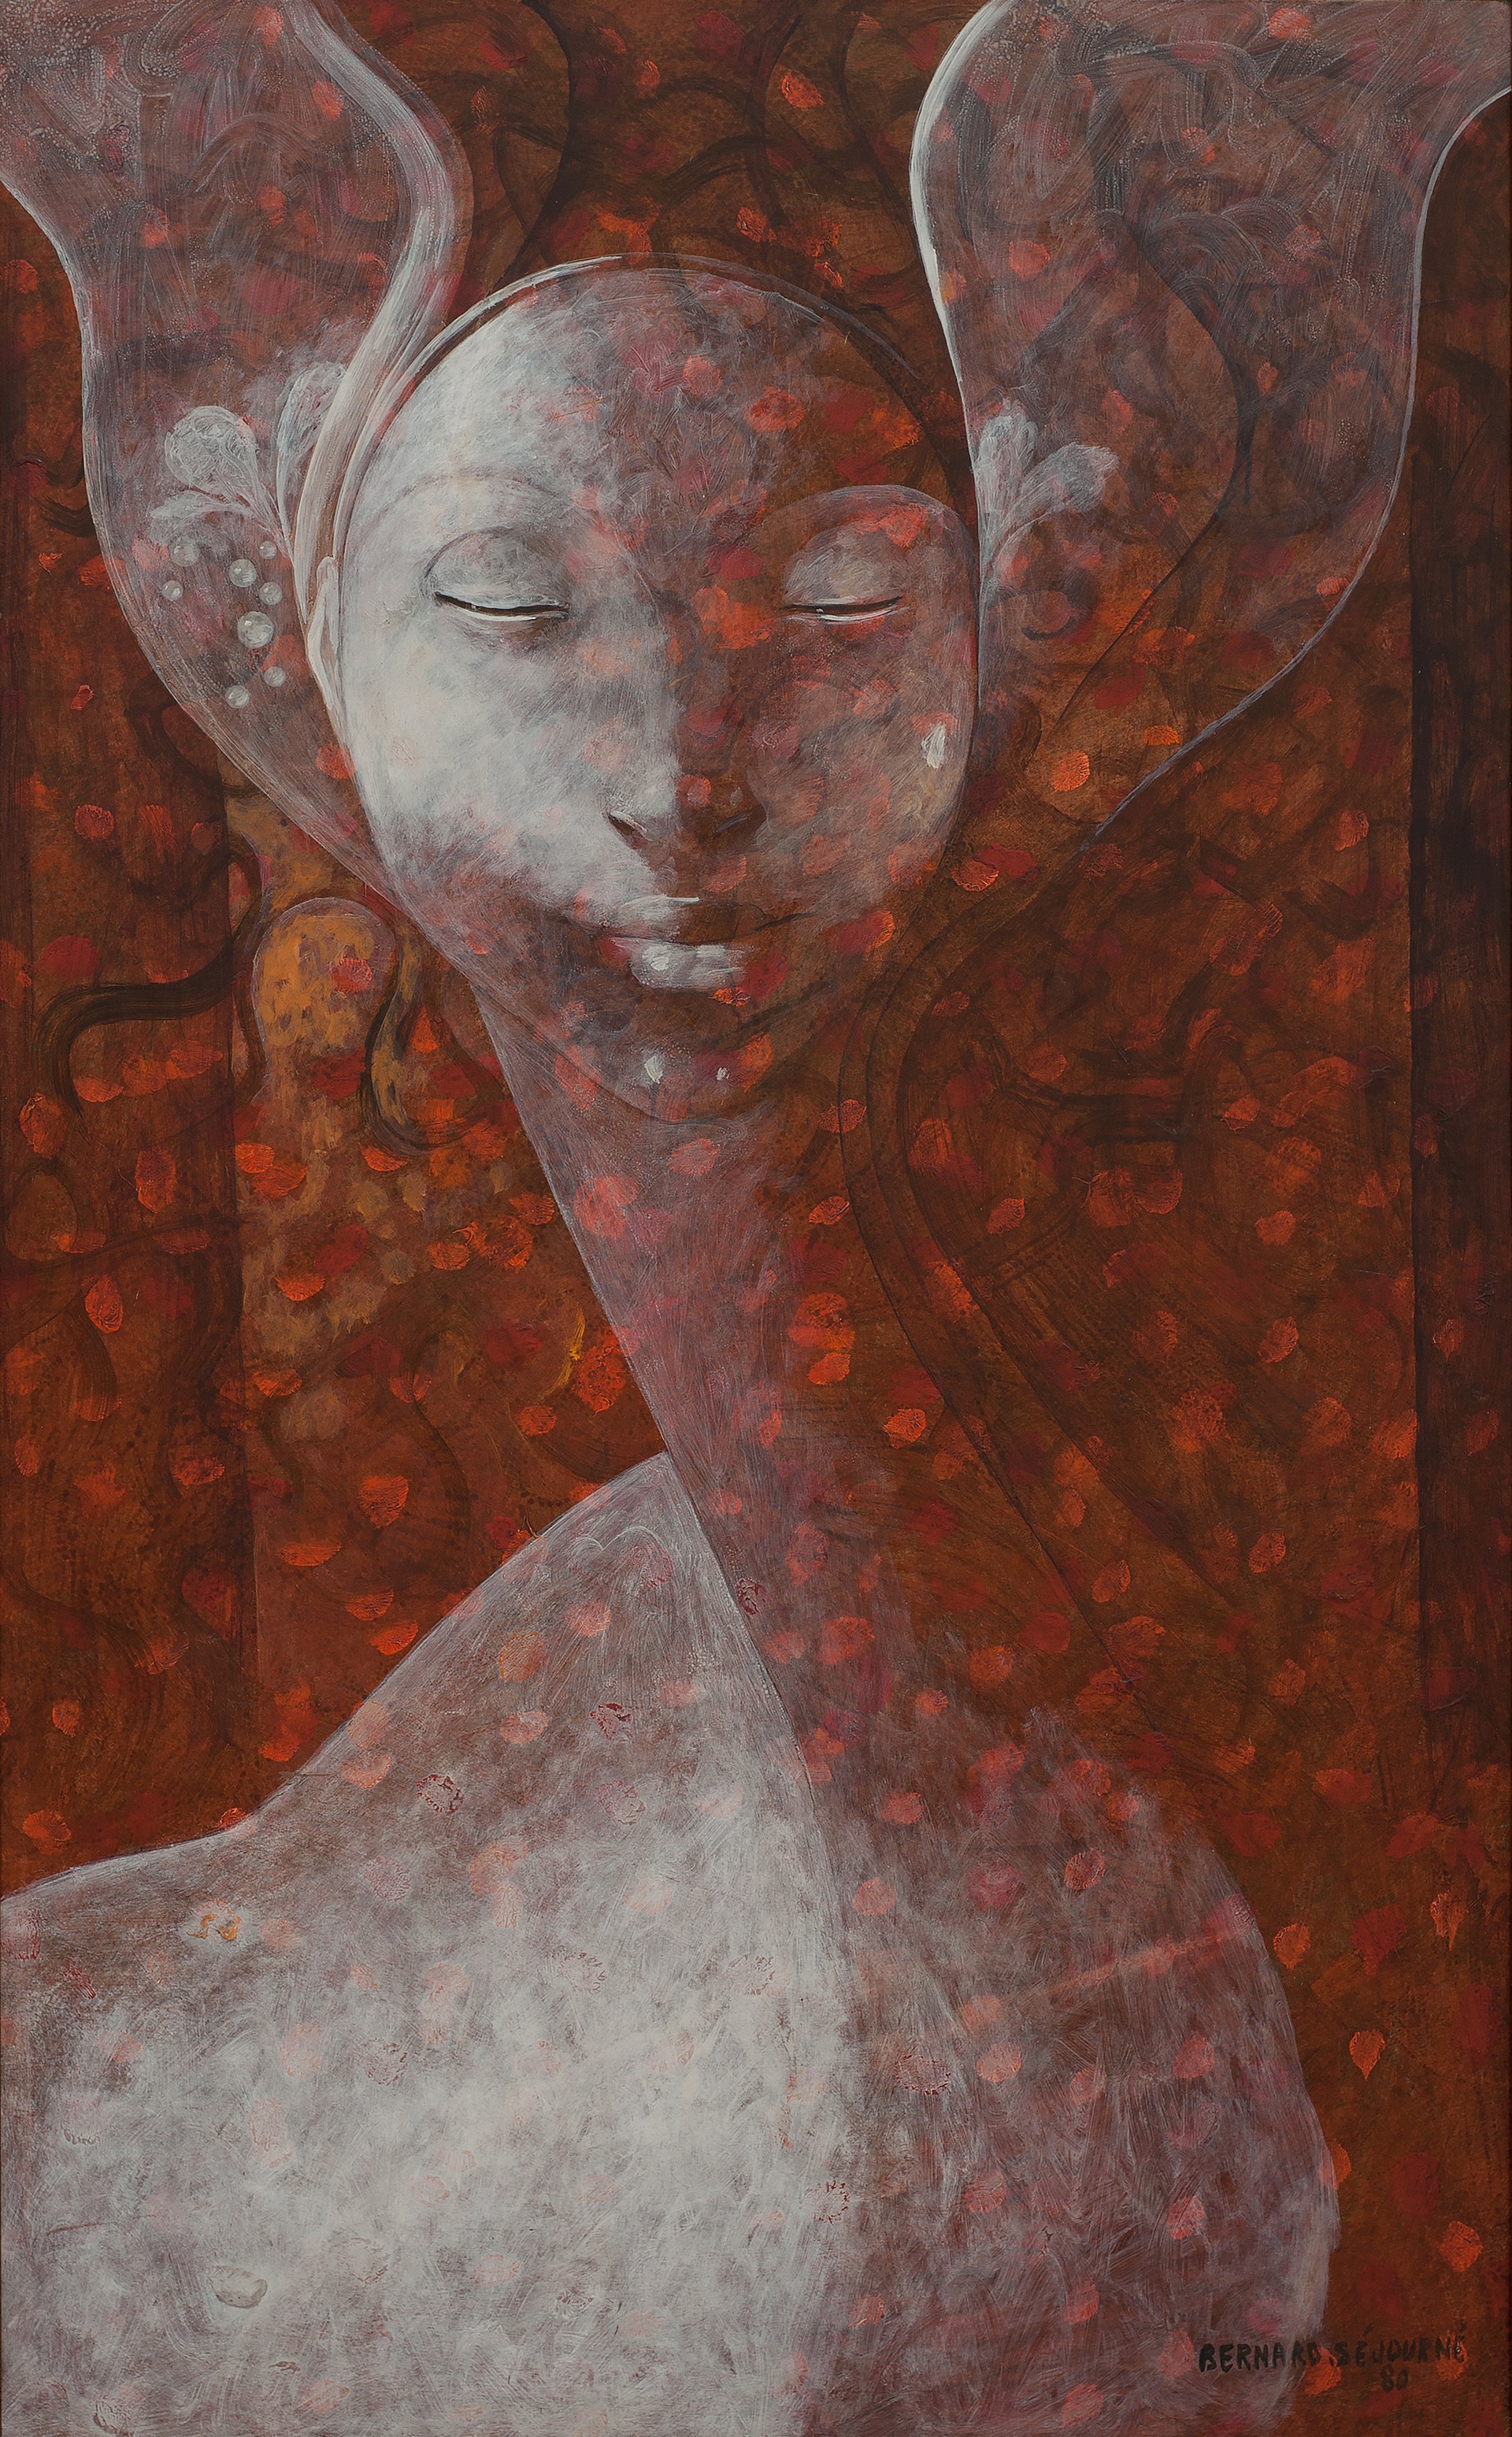 Abstract Woman In Red #26-3-96GSN by Bernard Sejourne (Haitian, 1947-1994)